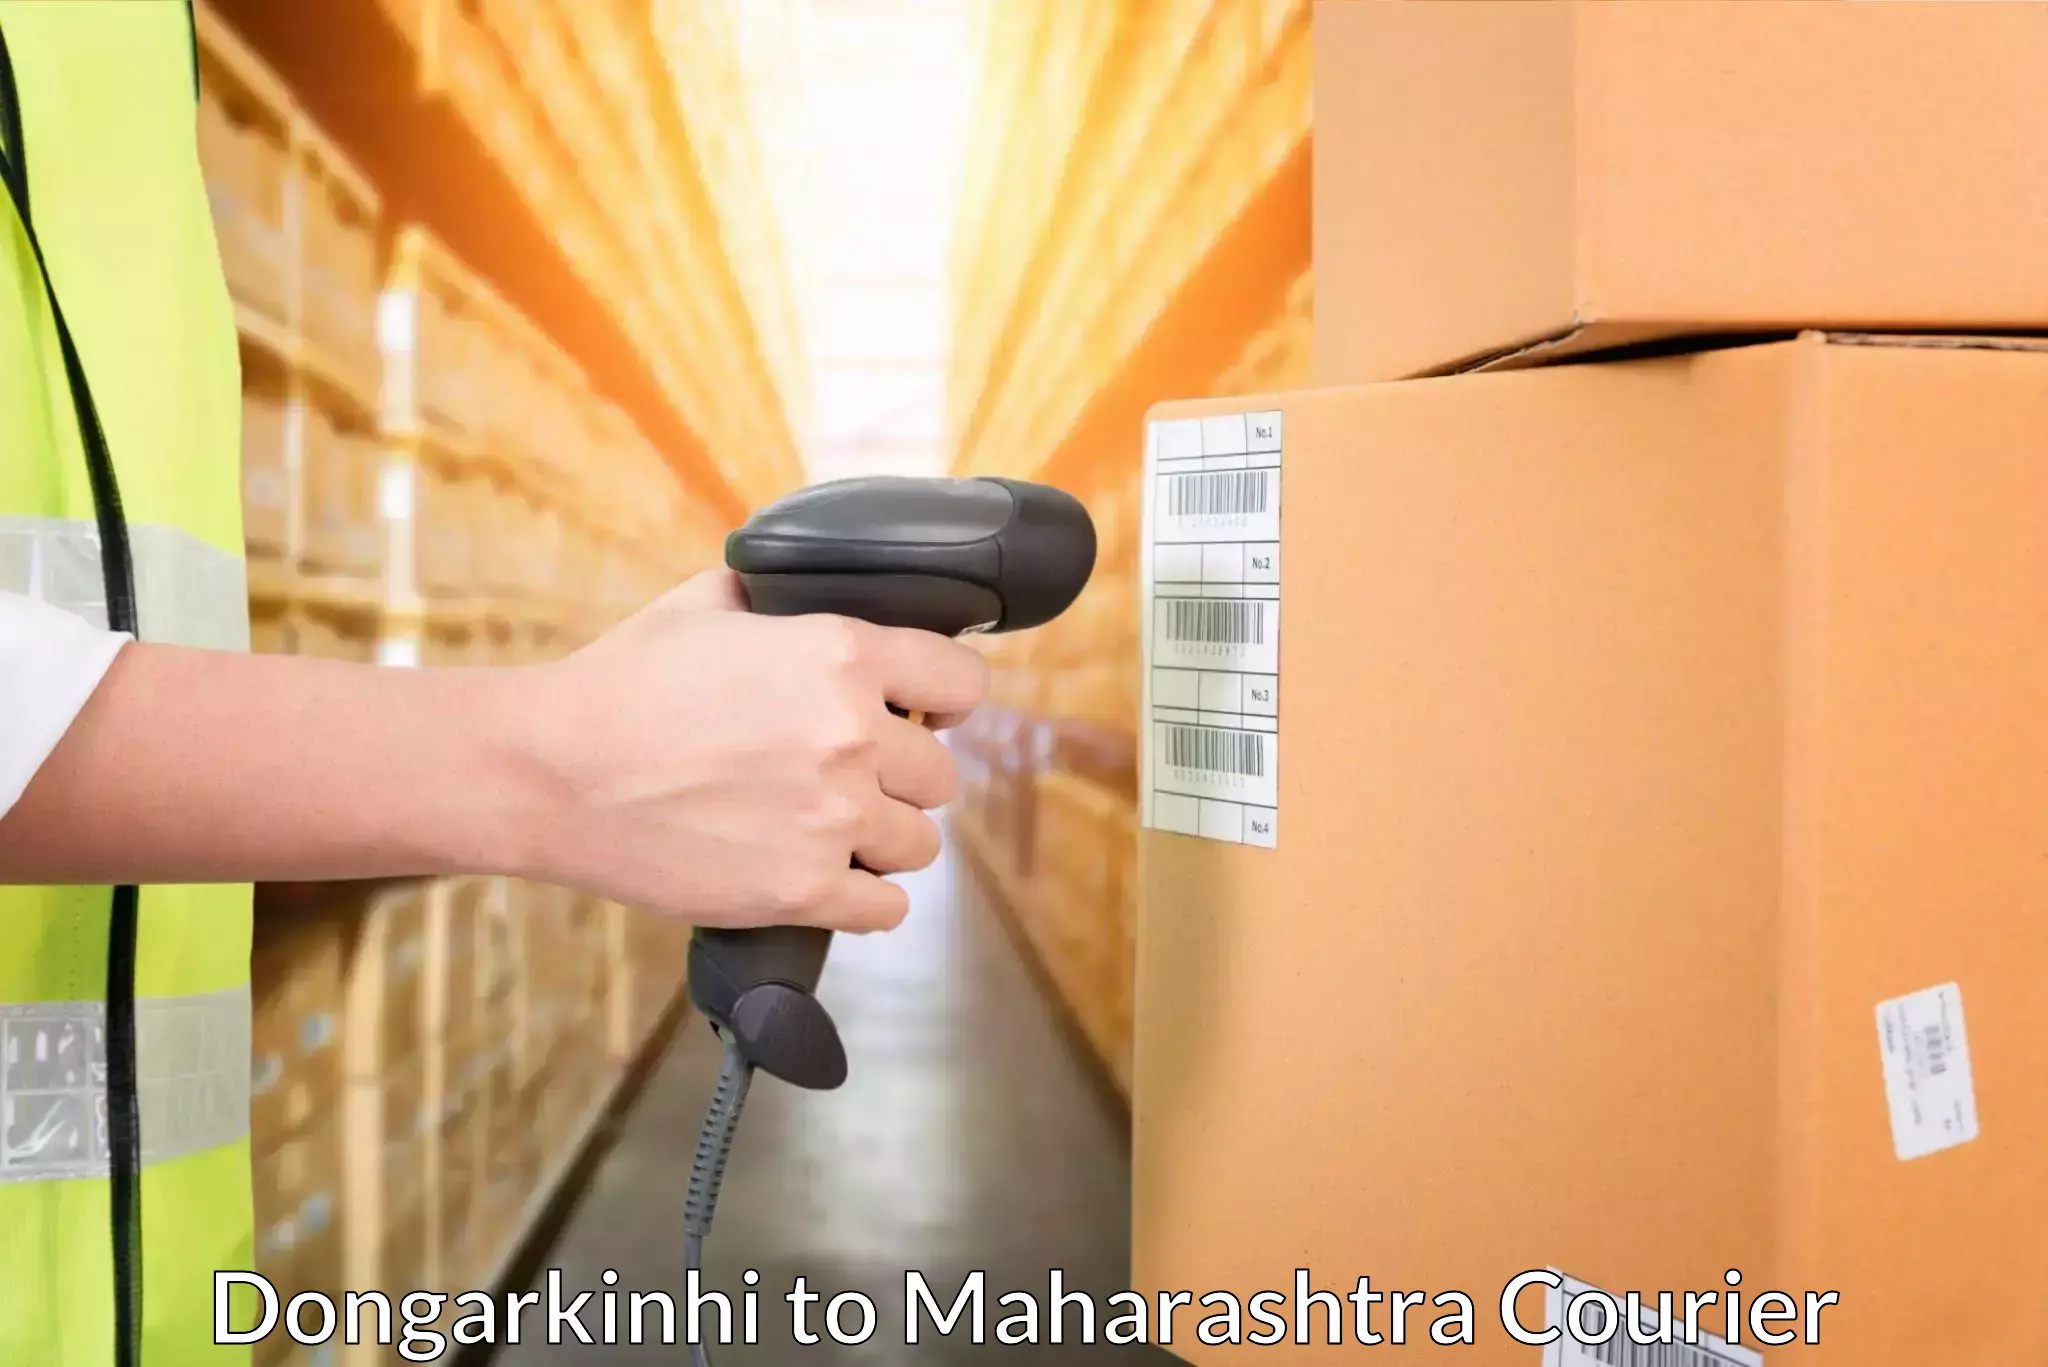 Premium delivery services Dongarkinhi to Ghatanji